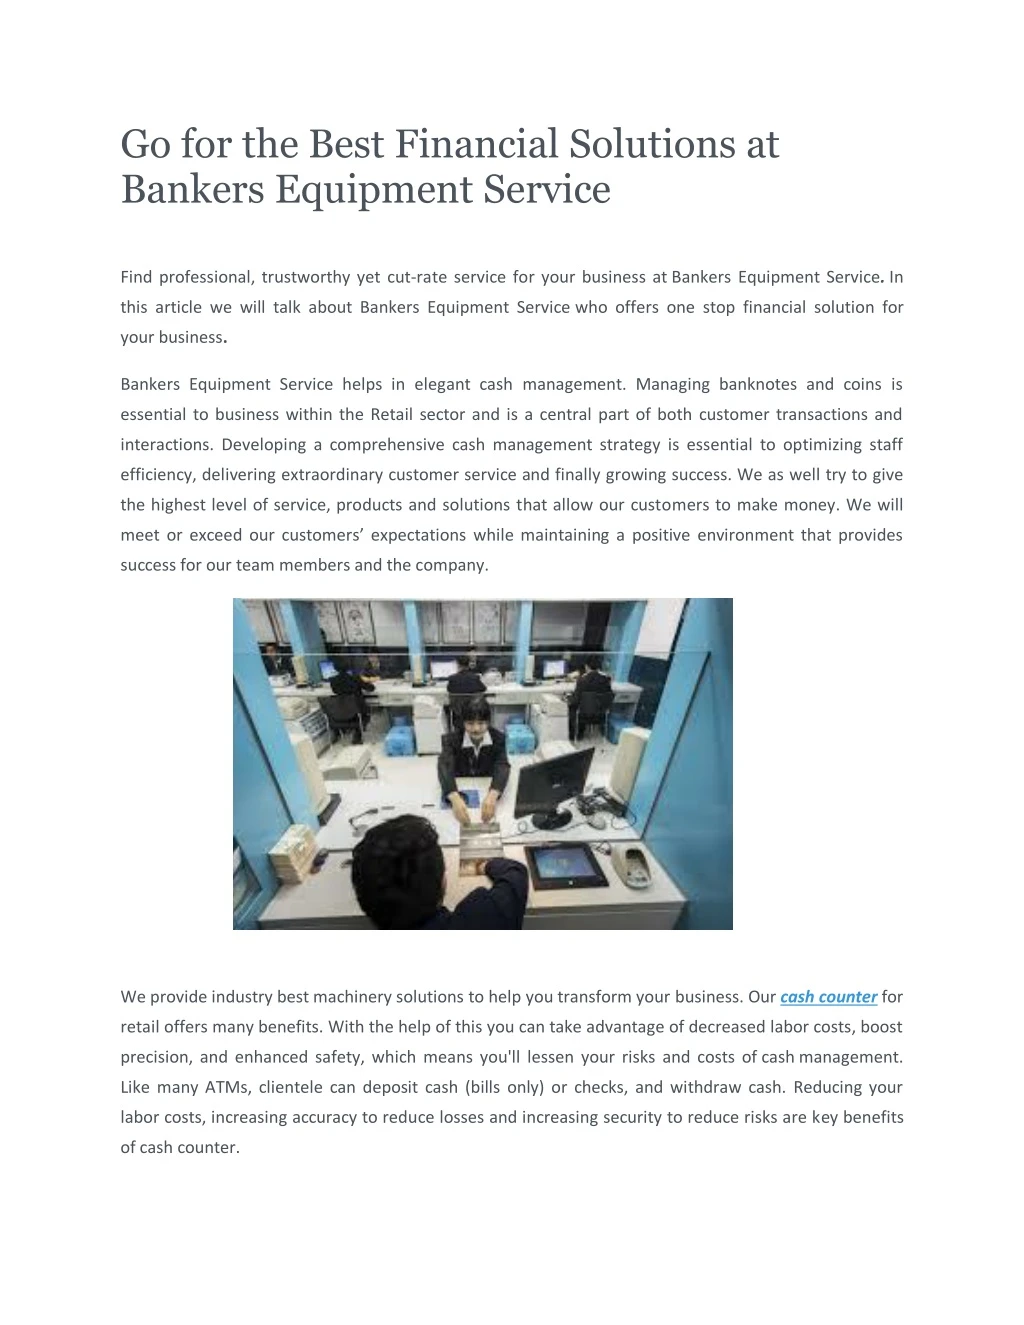 go for the best financial solutions at bankers